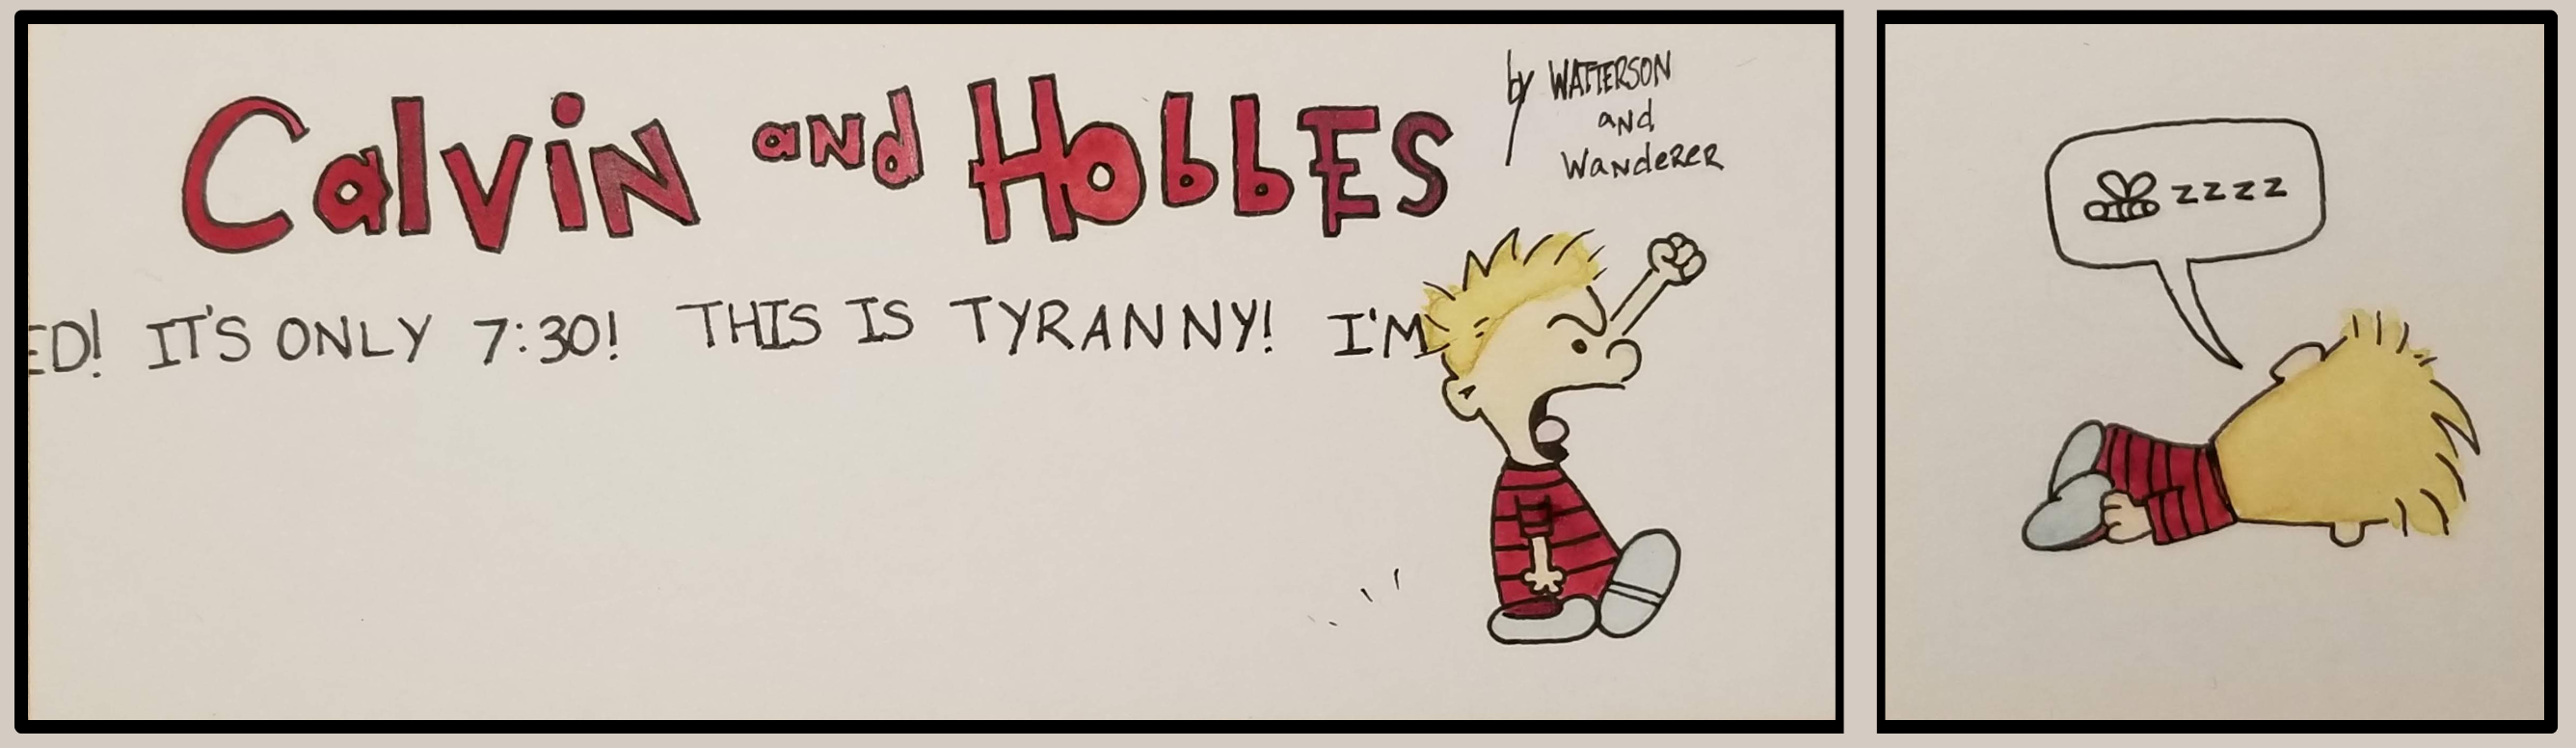 Watercolor & Ink 2 panel comic. 
Panel 1: Title Text reads "Calvin and Hobbes by Watterson and Wanderer". Angry Calvin is marching with his fist in the air, shouting "I'm not tired! It's only 7:30! This is tyranny! I'm"
Panel 2:Sleeping Calvin on the floor, voice bubble has a picture of a bee & says "zzzz".